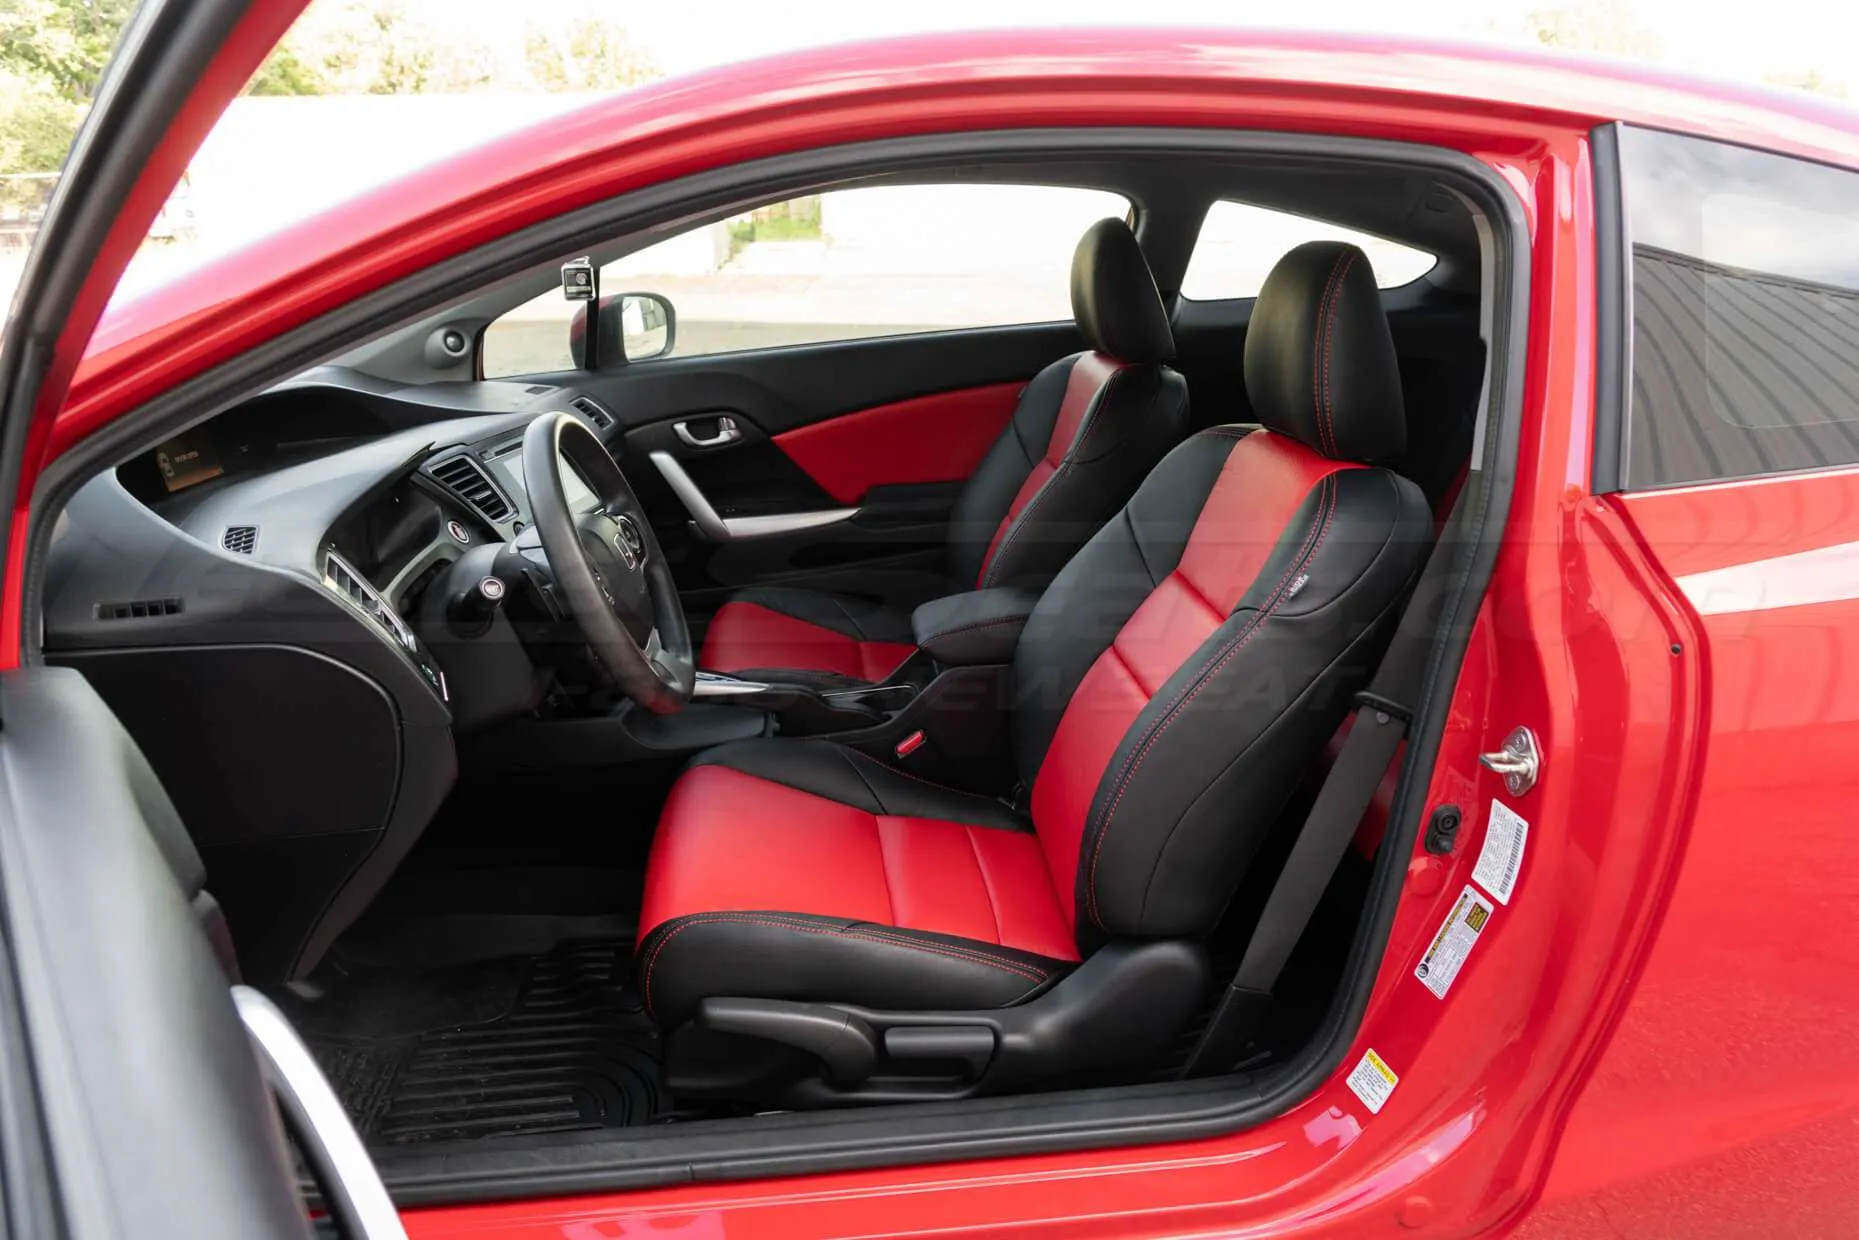 Honda Civic installed leather kit - Black & Bright Red - Drivers side wide angle view